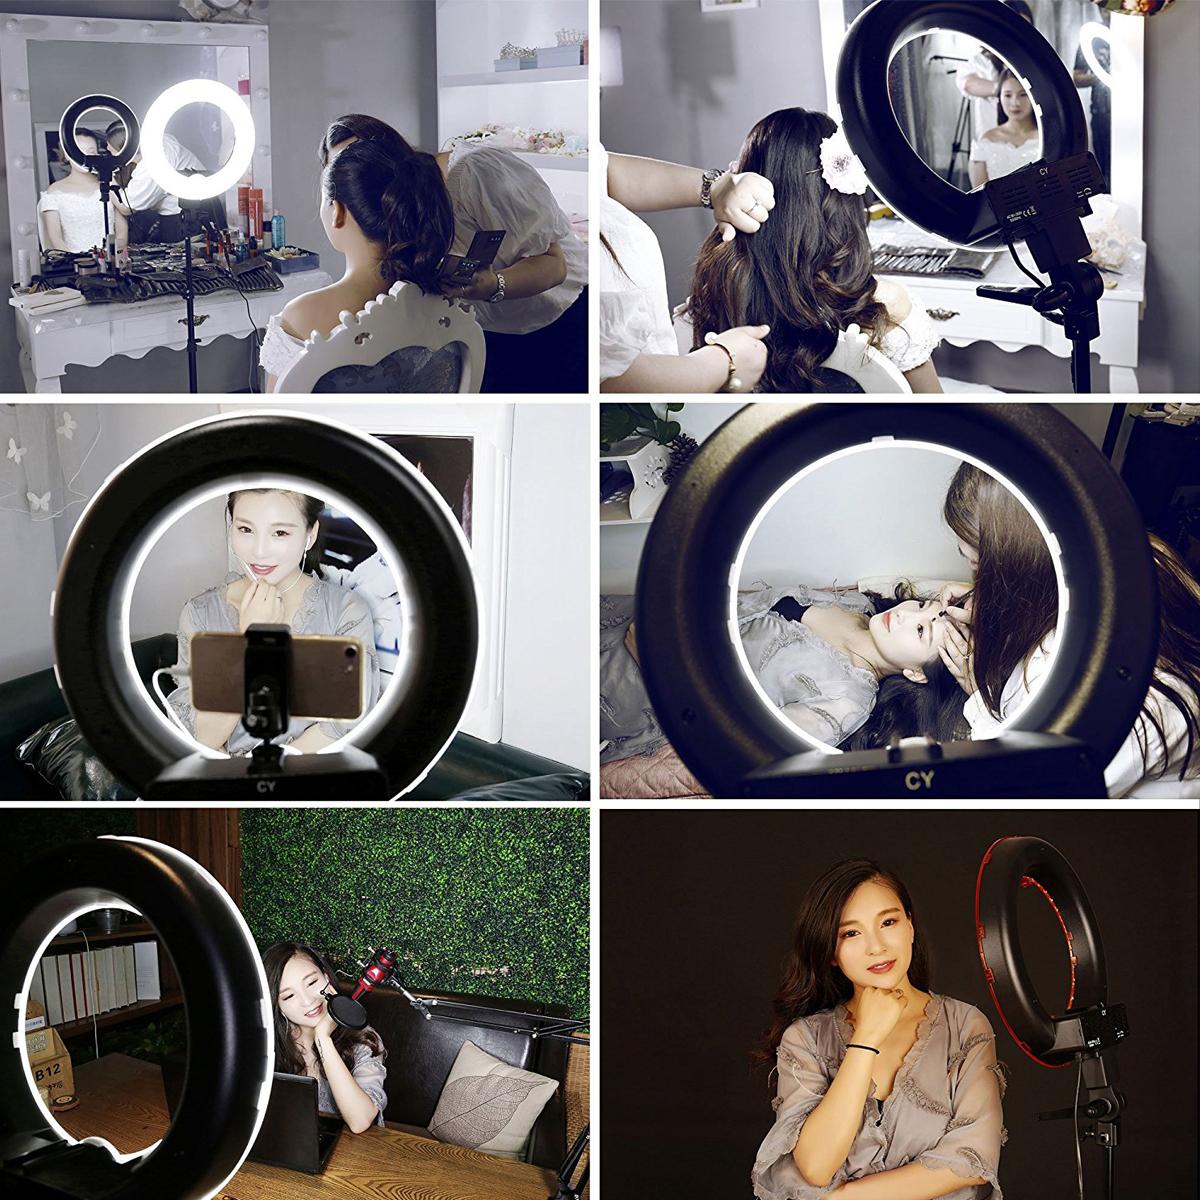 16cm-LED-Video-Ring-Light-5500K-Dimmable-with-160cm-Adjustable-Light-Stand-for-Youtube-Tiktok-Live-S-1403937-8